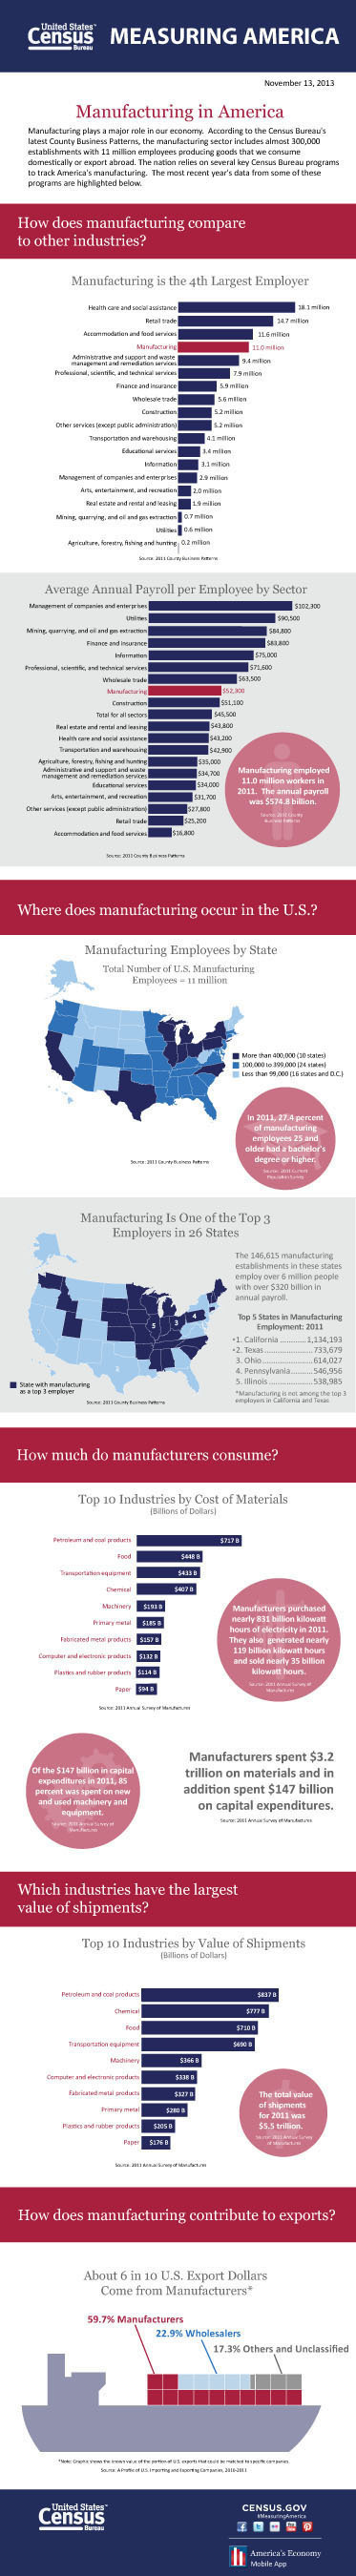 A new U.S. Census Bureau infographic, "Manufacturing in America," focuses on the scope of manufacturing, its importance as a major employer and its concentrations throughout the country. The infographic highlights a wide range of statistics from sources such as County Business Patterns and Annual Survey of Manufactures. With almost 300,000 establishments and 11 million employees, manufacturing plays a major role in the nation's economy. The most recent year's data from some of these programs are highlighted. Internet address: http://www.census.gov/how/. (PRNewsFoto/U.S. Census Bureau) (PRNewsFoto/U.S. CENSUS BUREAU)